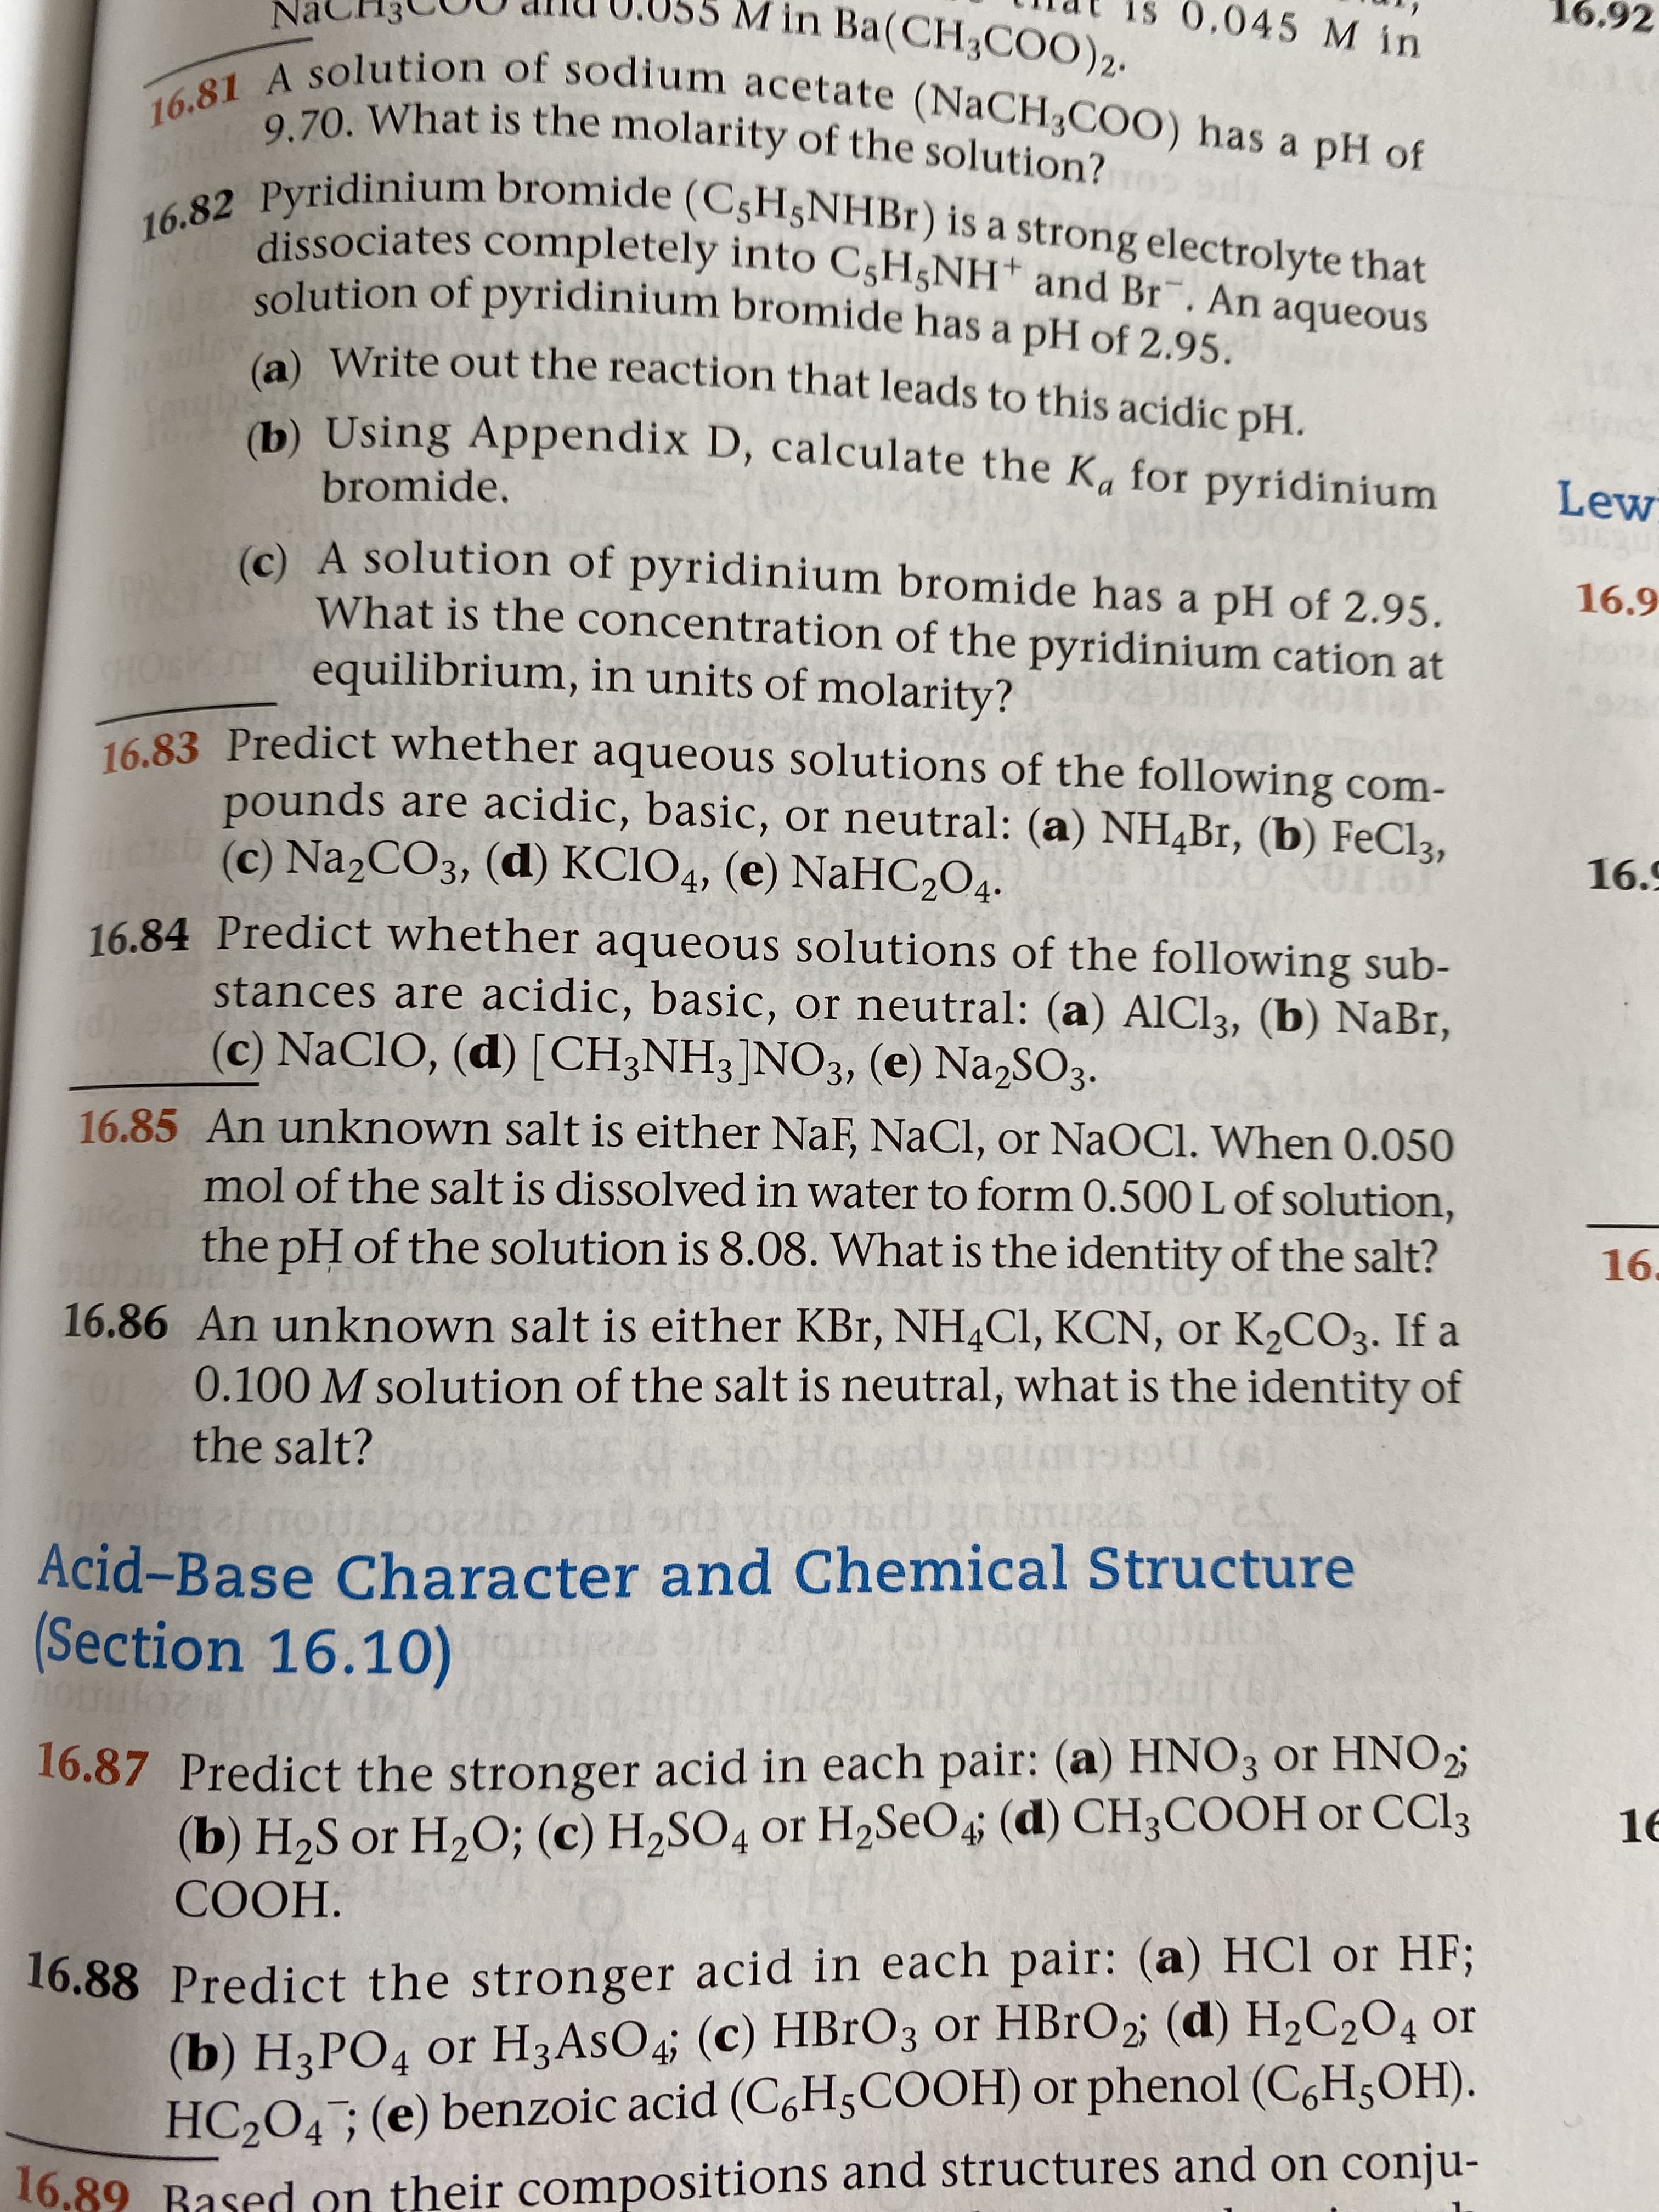 4•
16.84 Predict whether aqueous solutions of the following sub-
stances are acidic, basic, or neutral: (a) AlCl3, (b) NaBr,
(c) NaCIO, (d) [CH;NH3]NO3, (e) Na,SO3.
